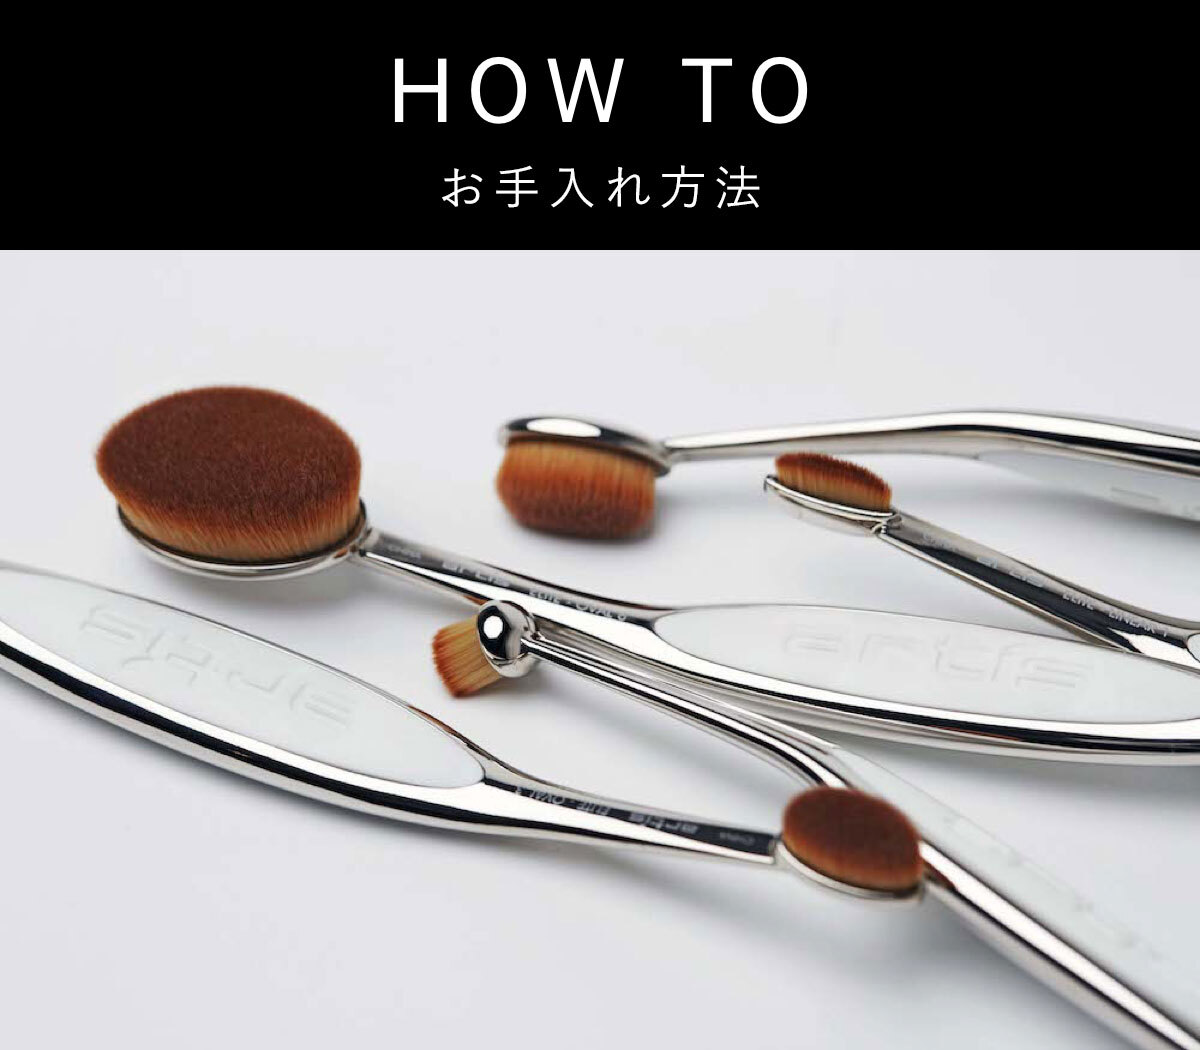 HOW TO 〜使い方〜 